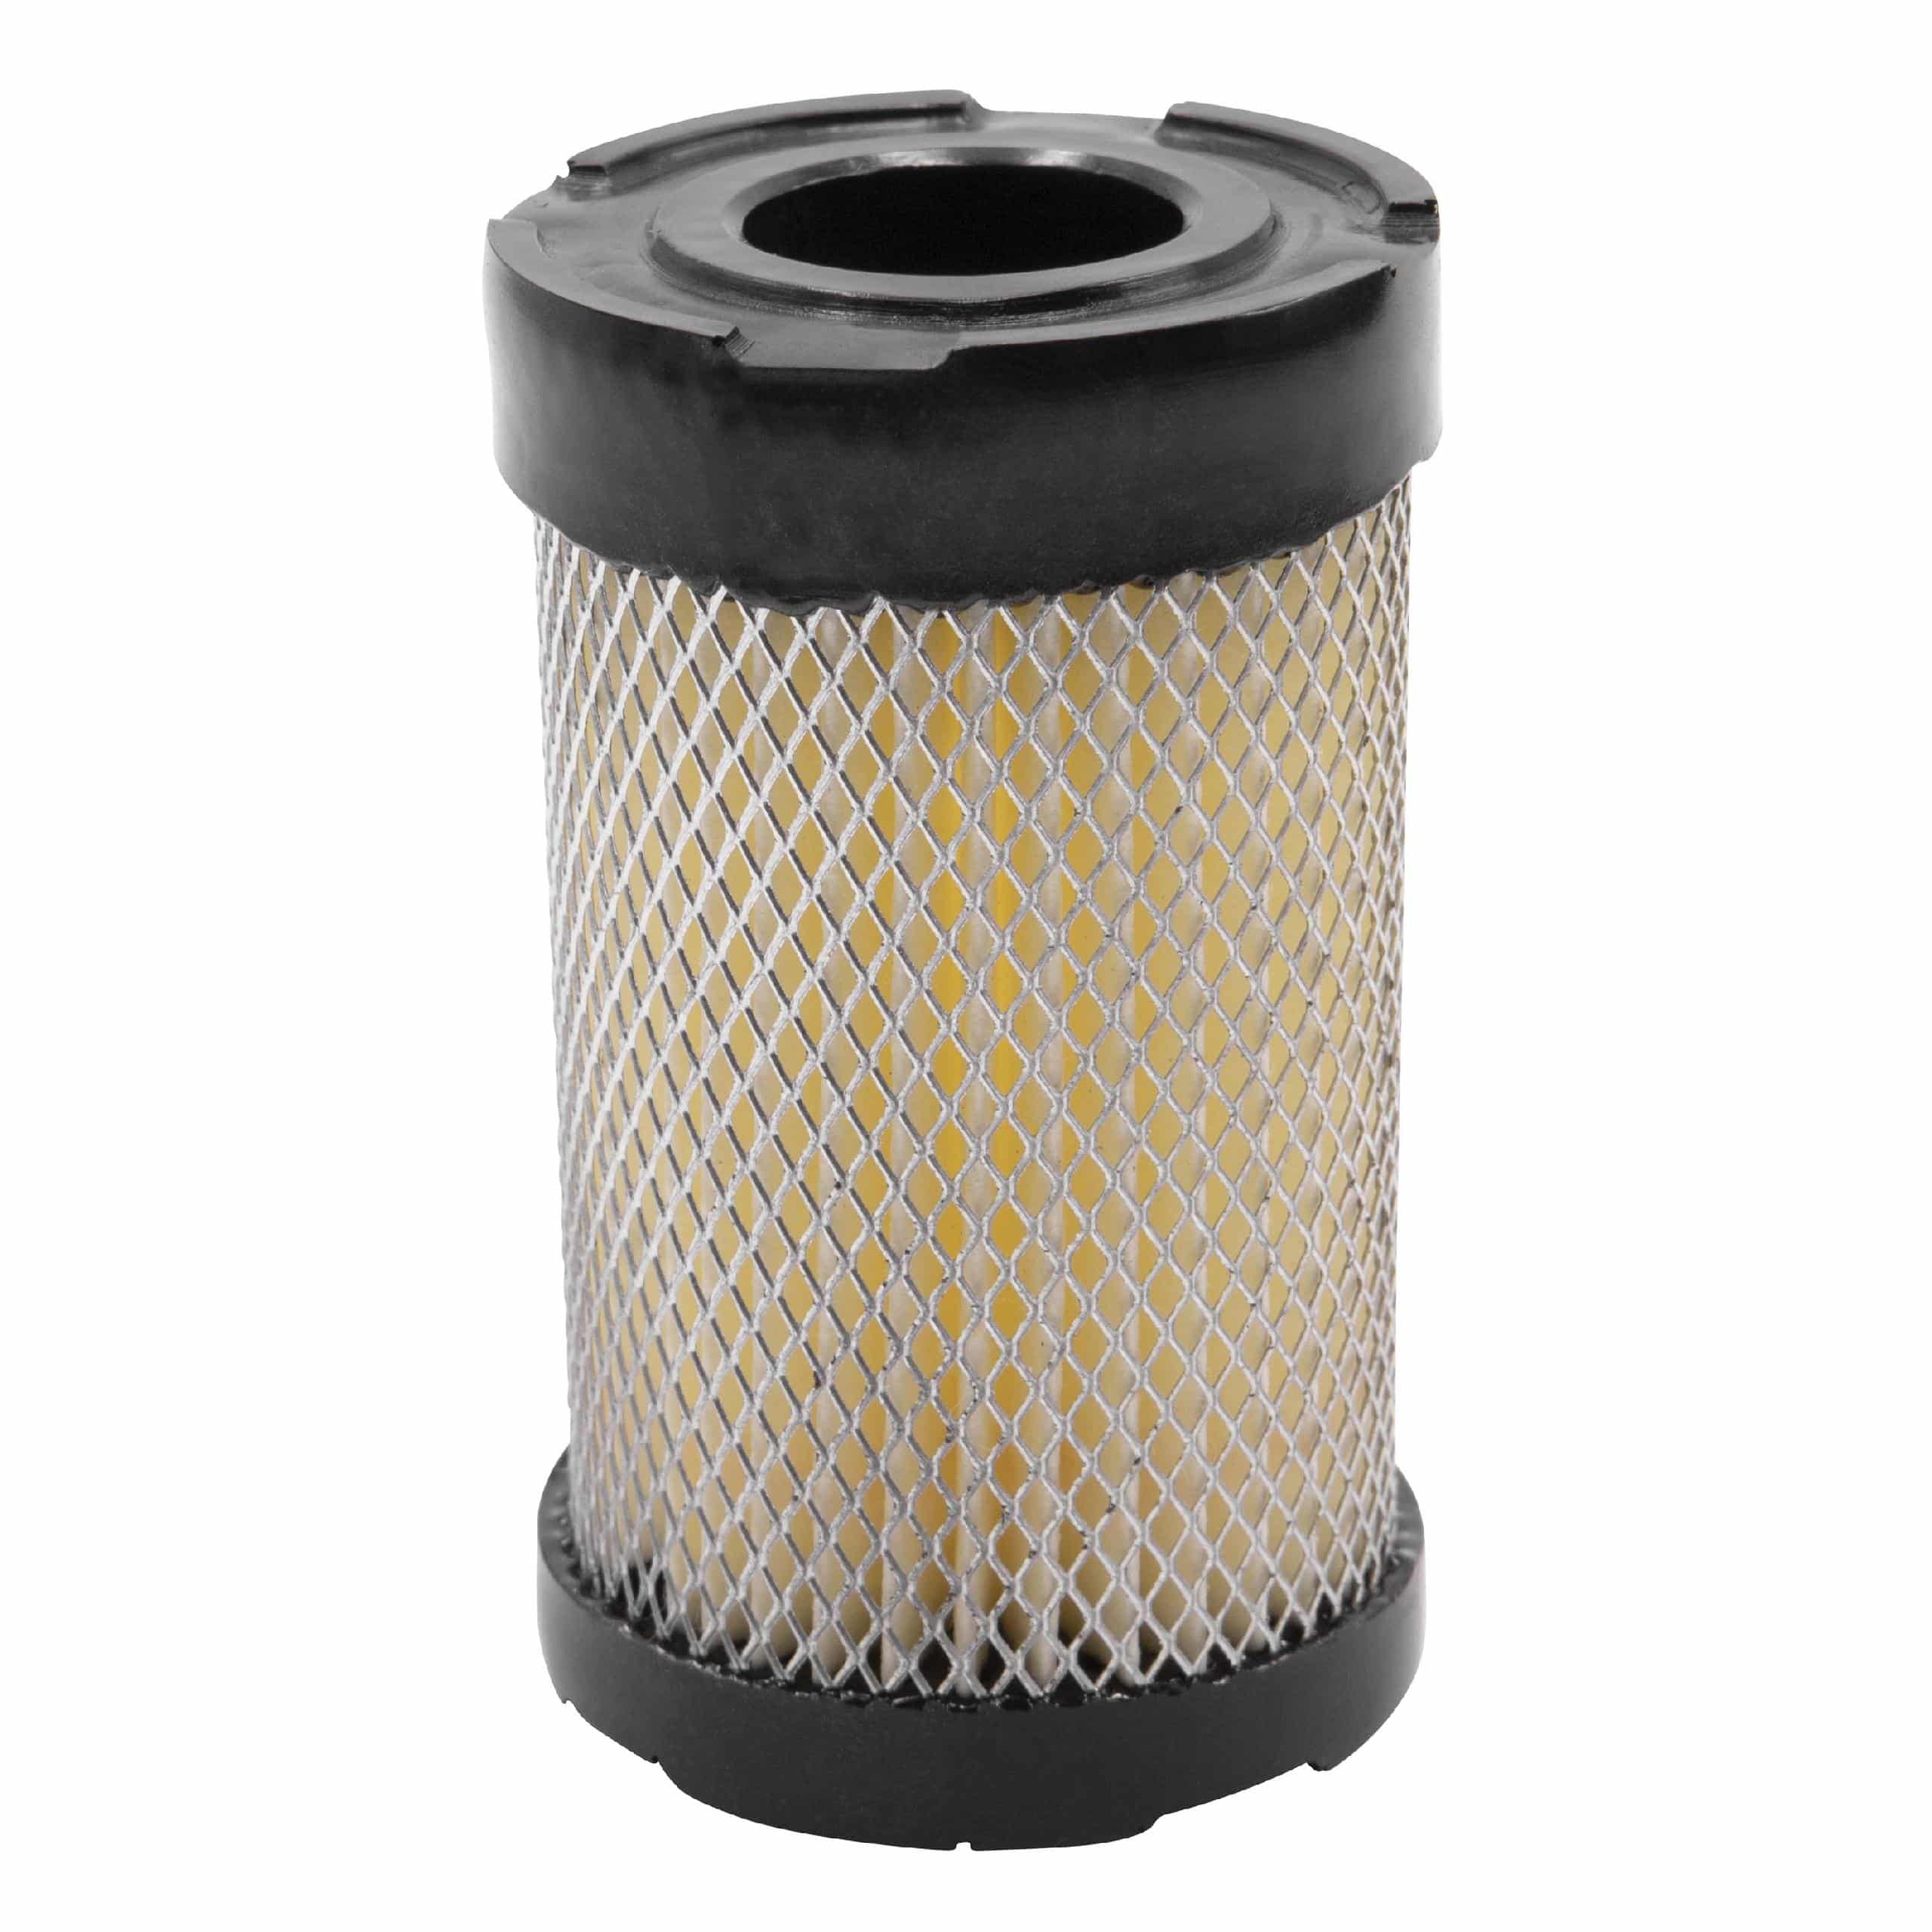 Filter replaces Craftsman 63087A, 33342 for Lawn Mower